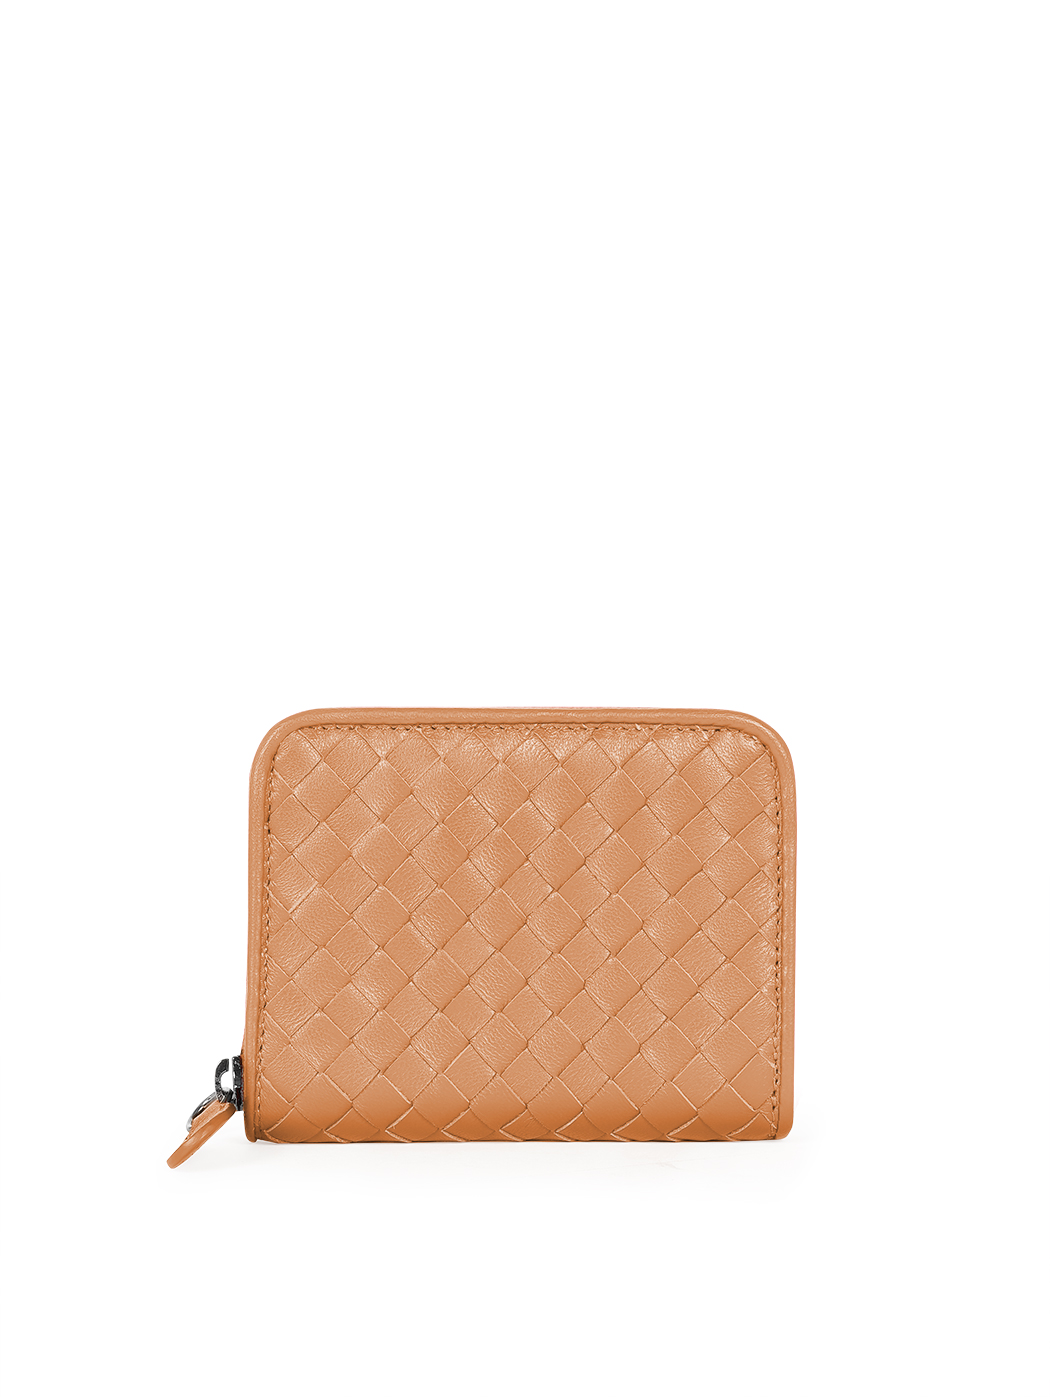 Compact zip-around wallet in brown woven leather